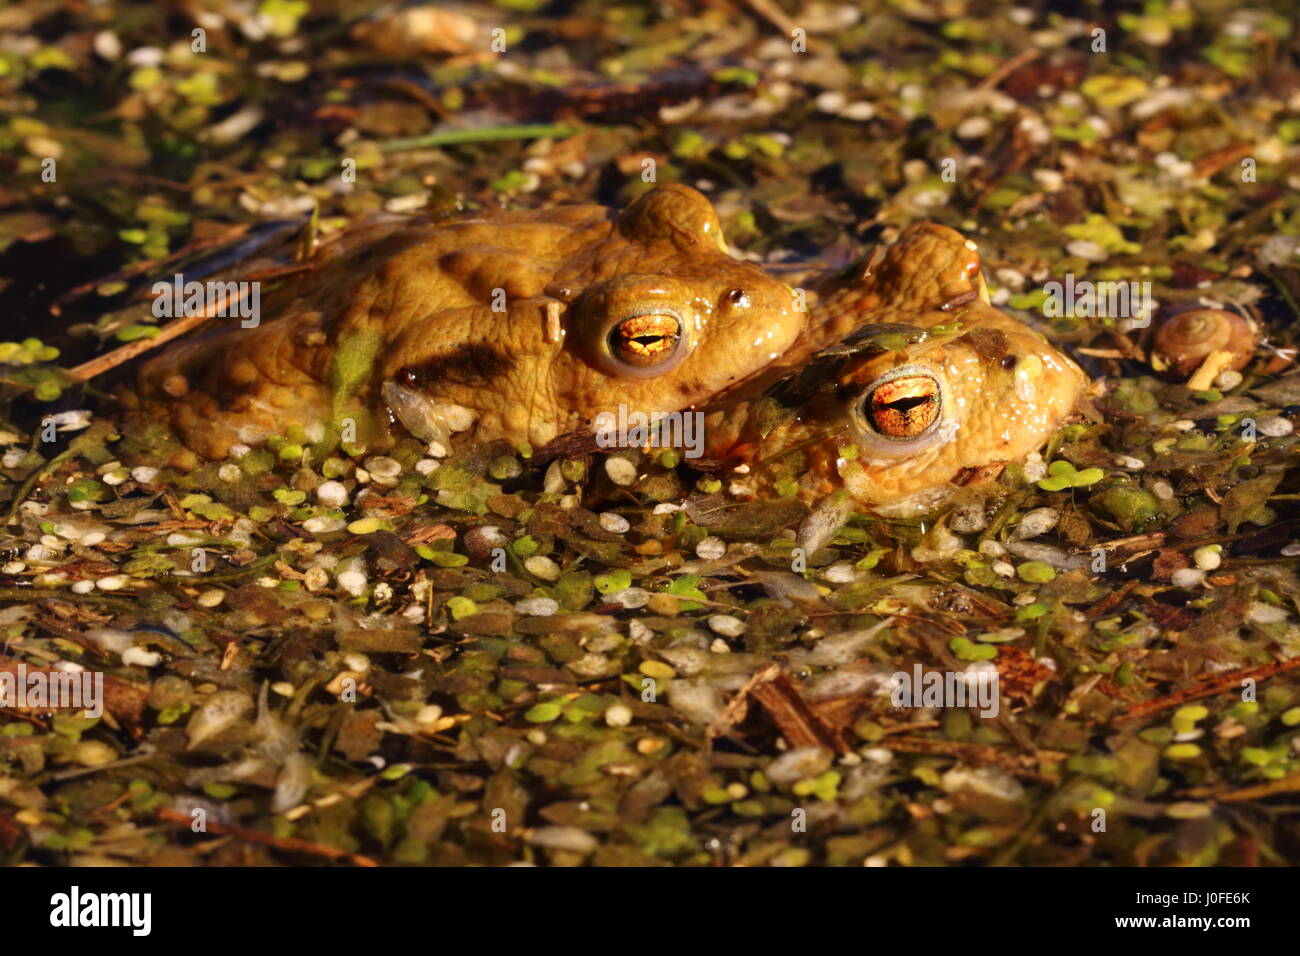 Mating Common Toad Stock Photo